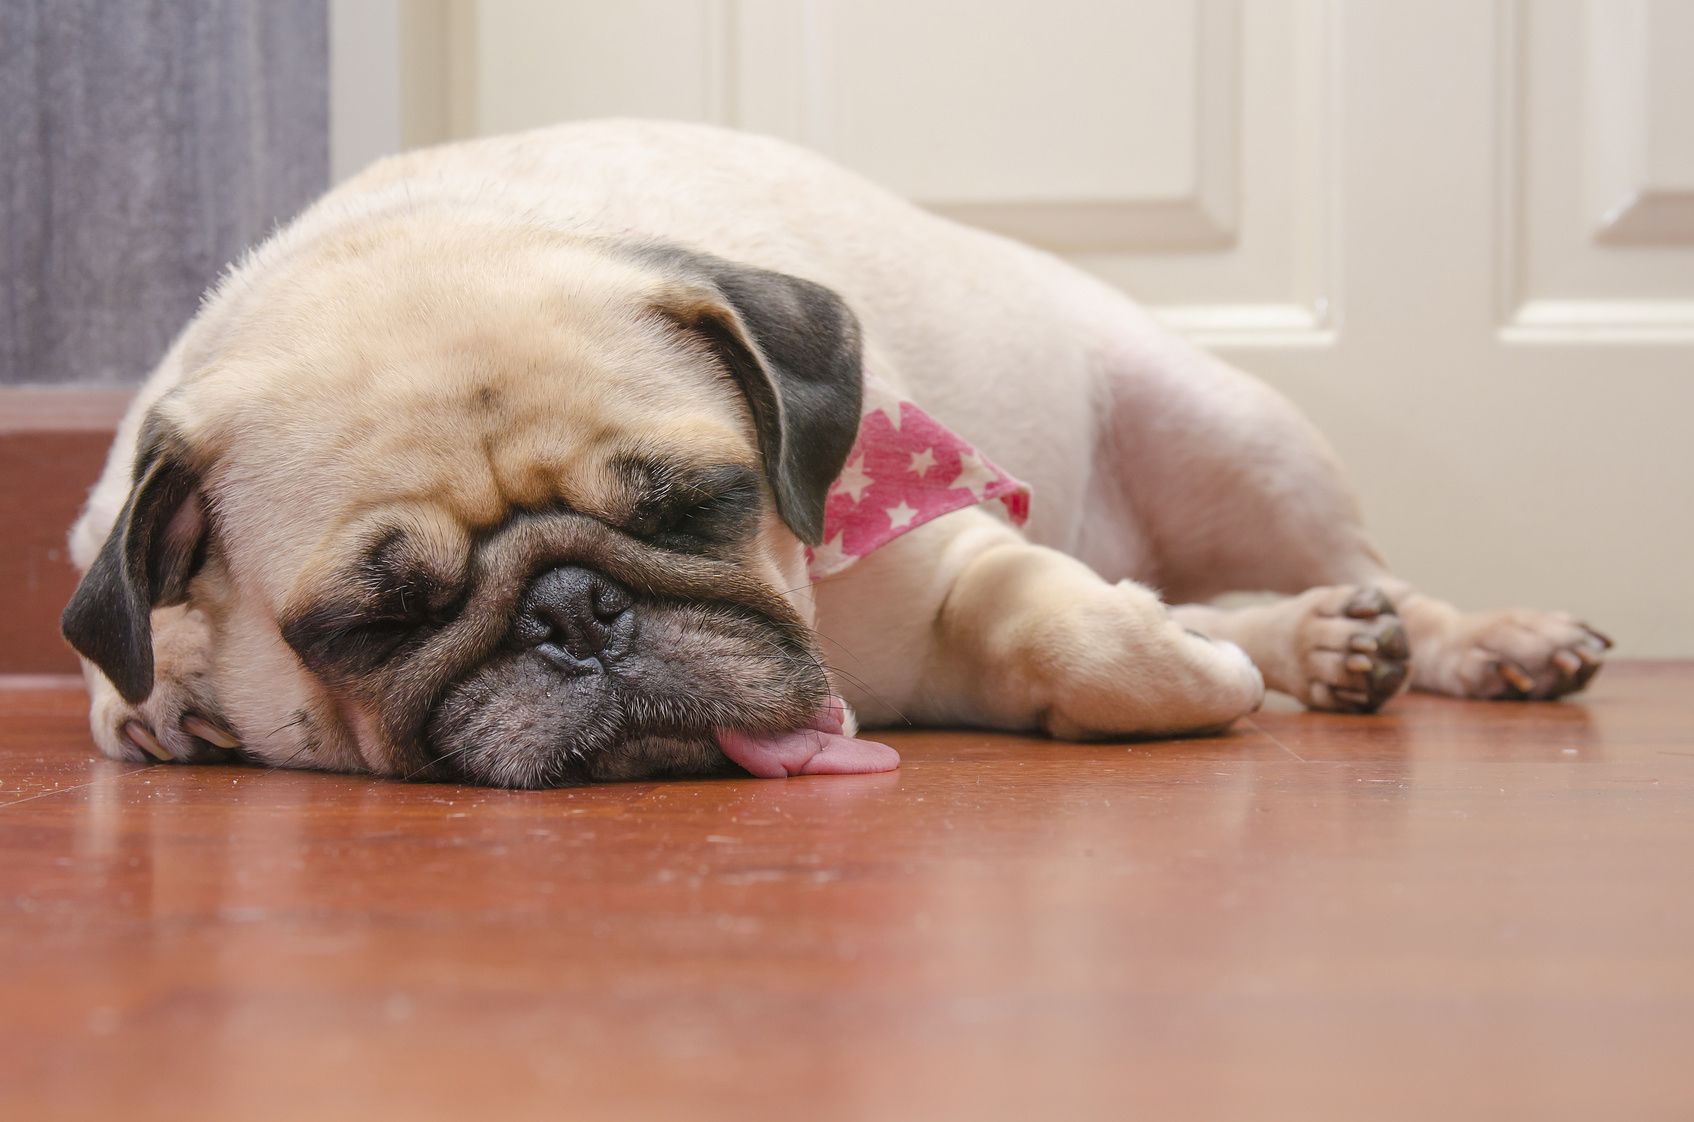 Close-up face of Cute pug puppy fat dog sleeping by chin and tongue lay down on laminate floor